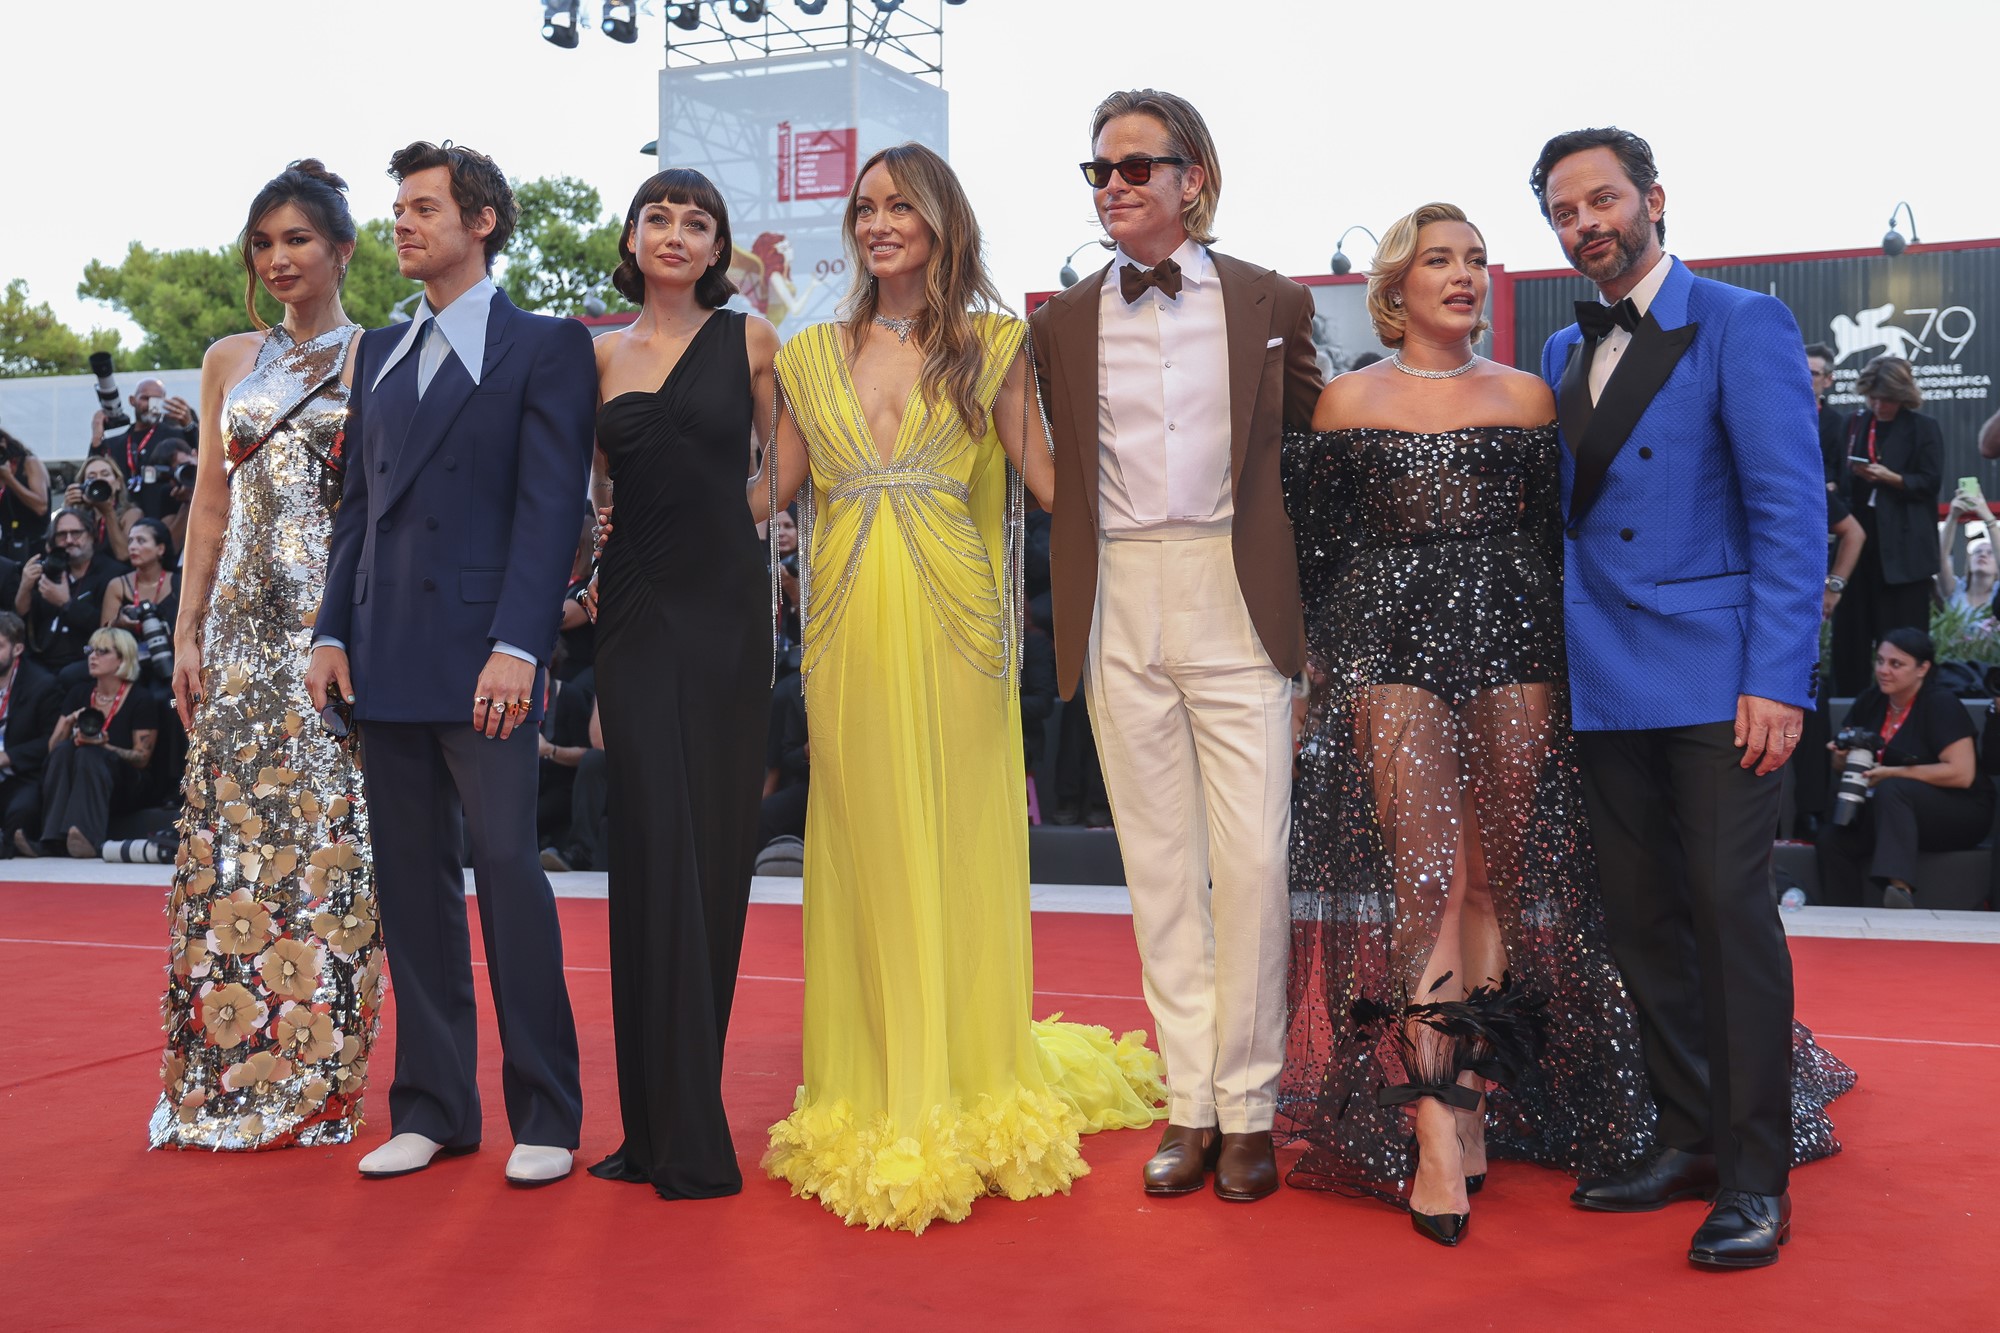 cast of don't worry darling poses on red carpet arm in arm